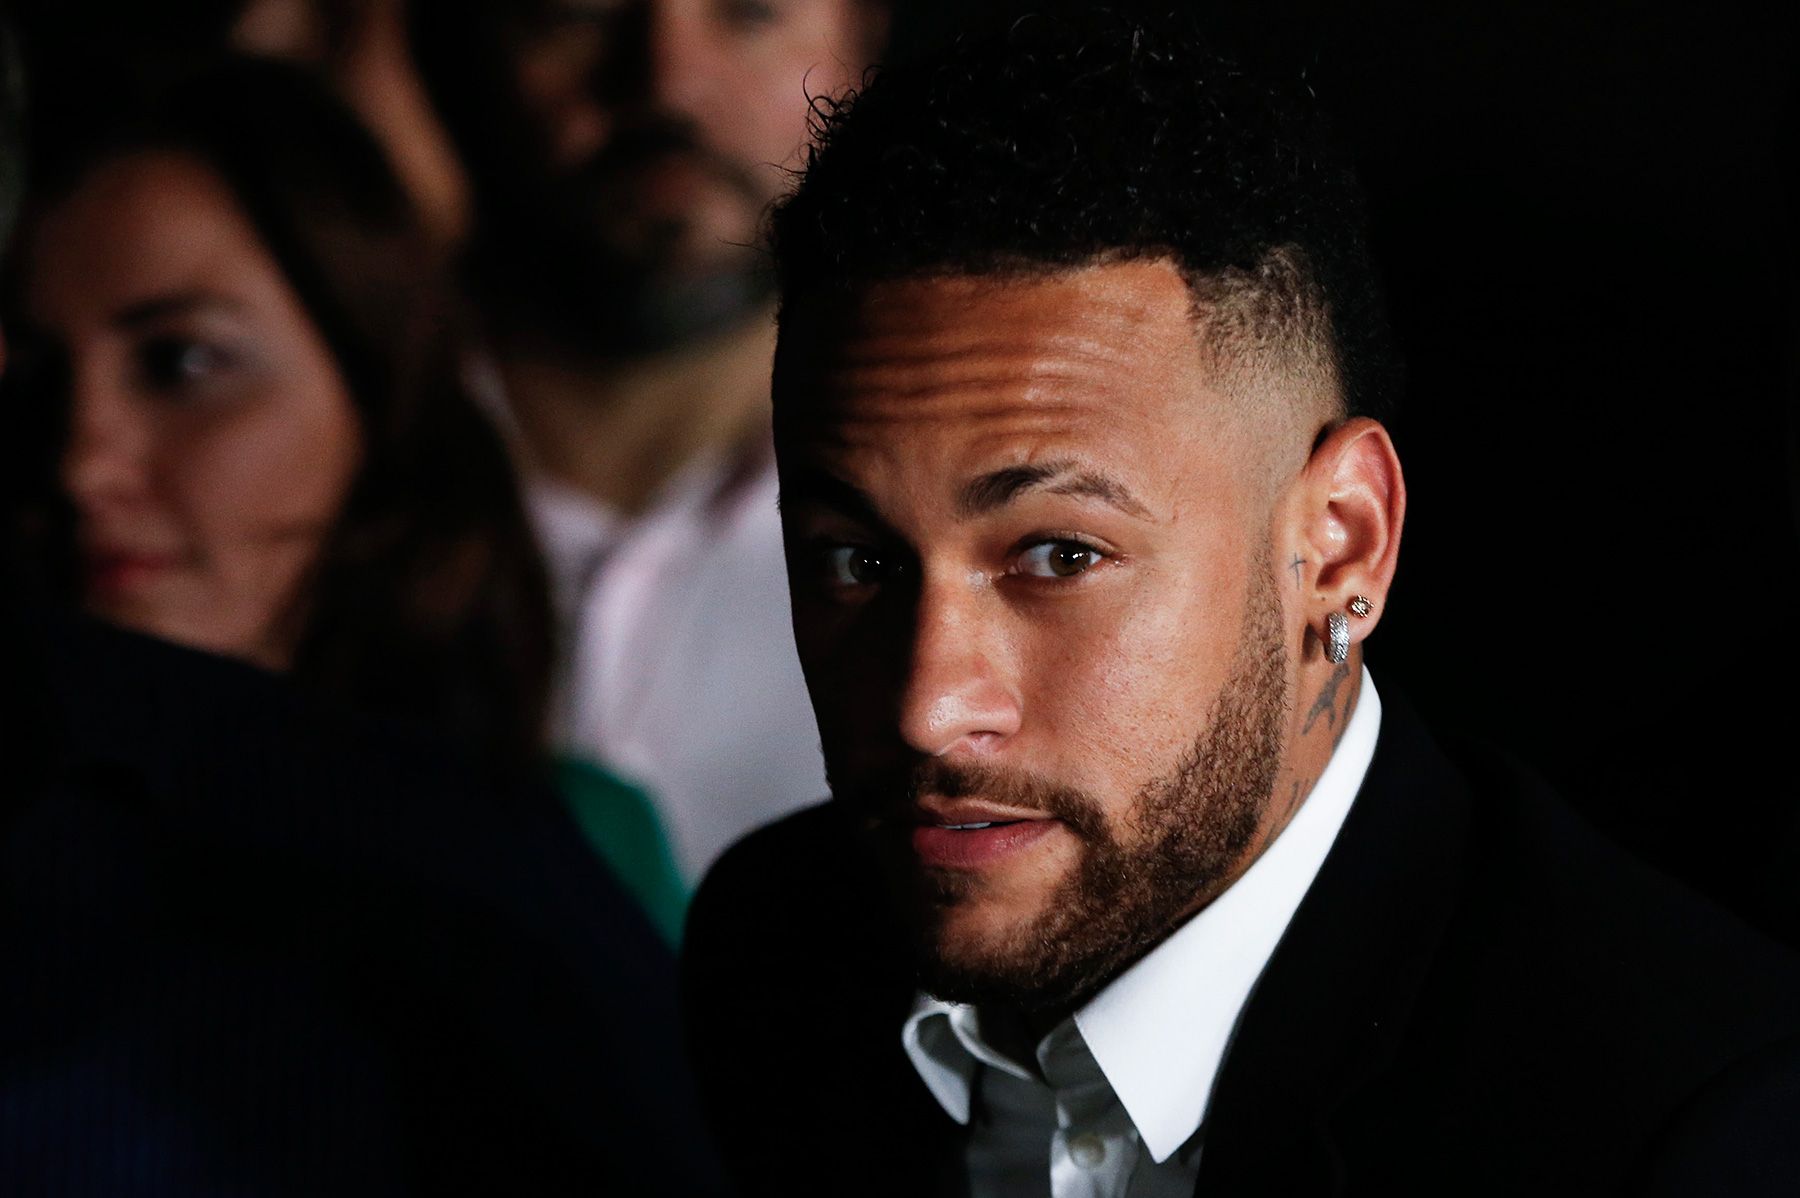 Neymar In an act dressed of suit